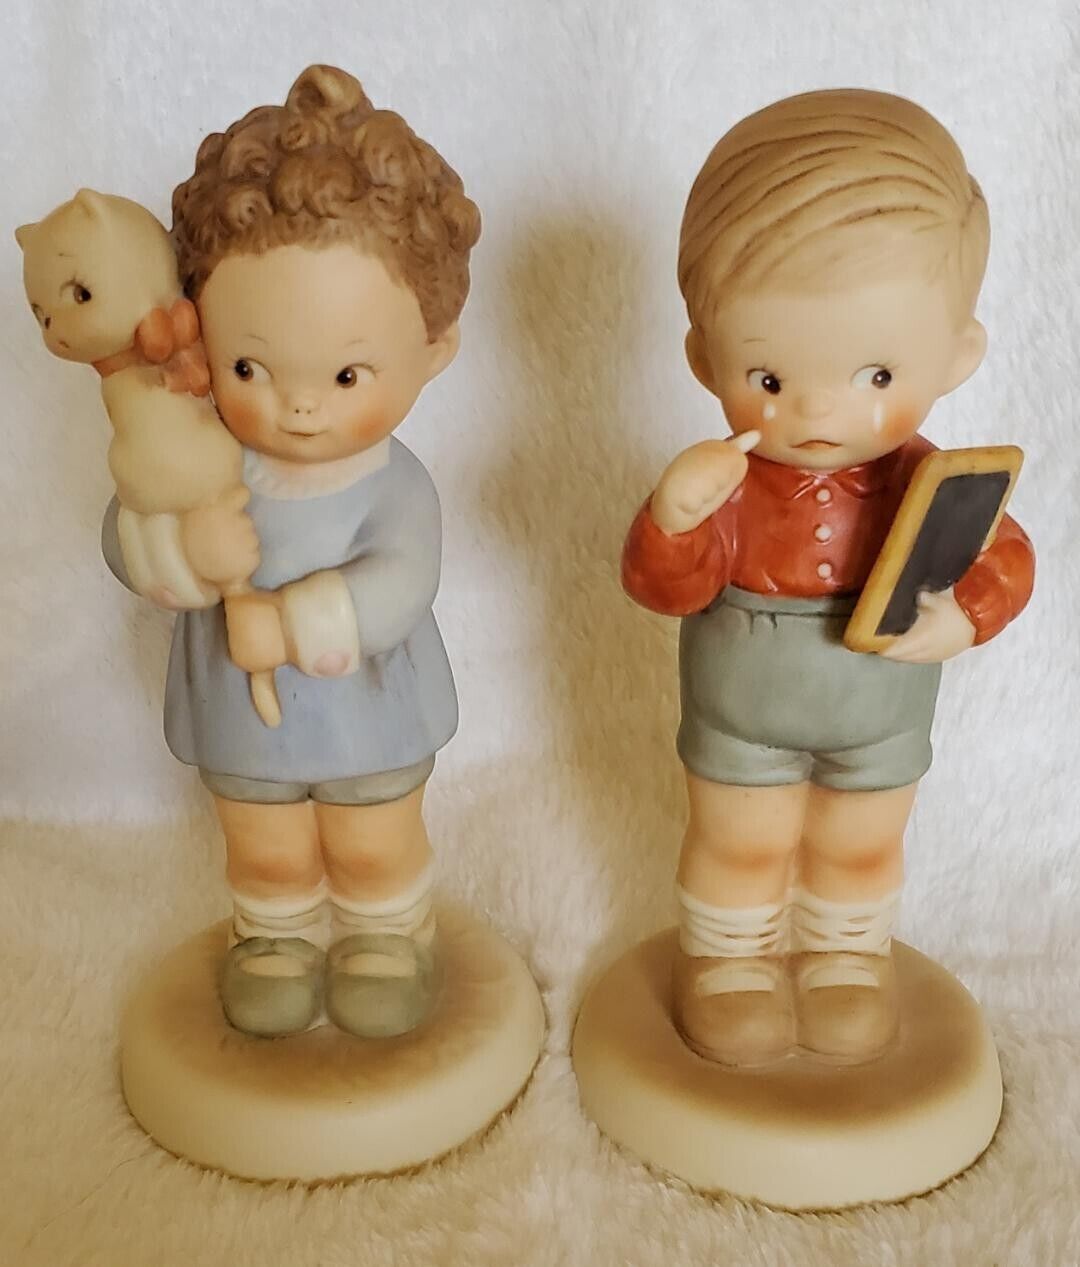 Vintage Enesco Lucie Atwell Boy and Girl Figurines (2)